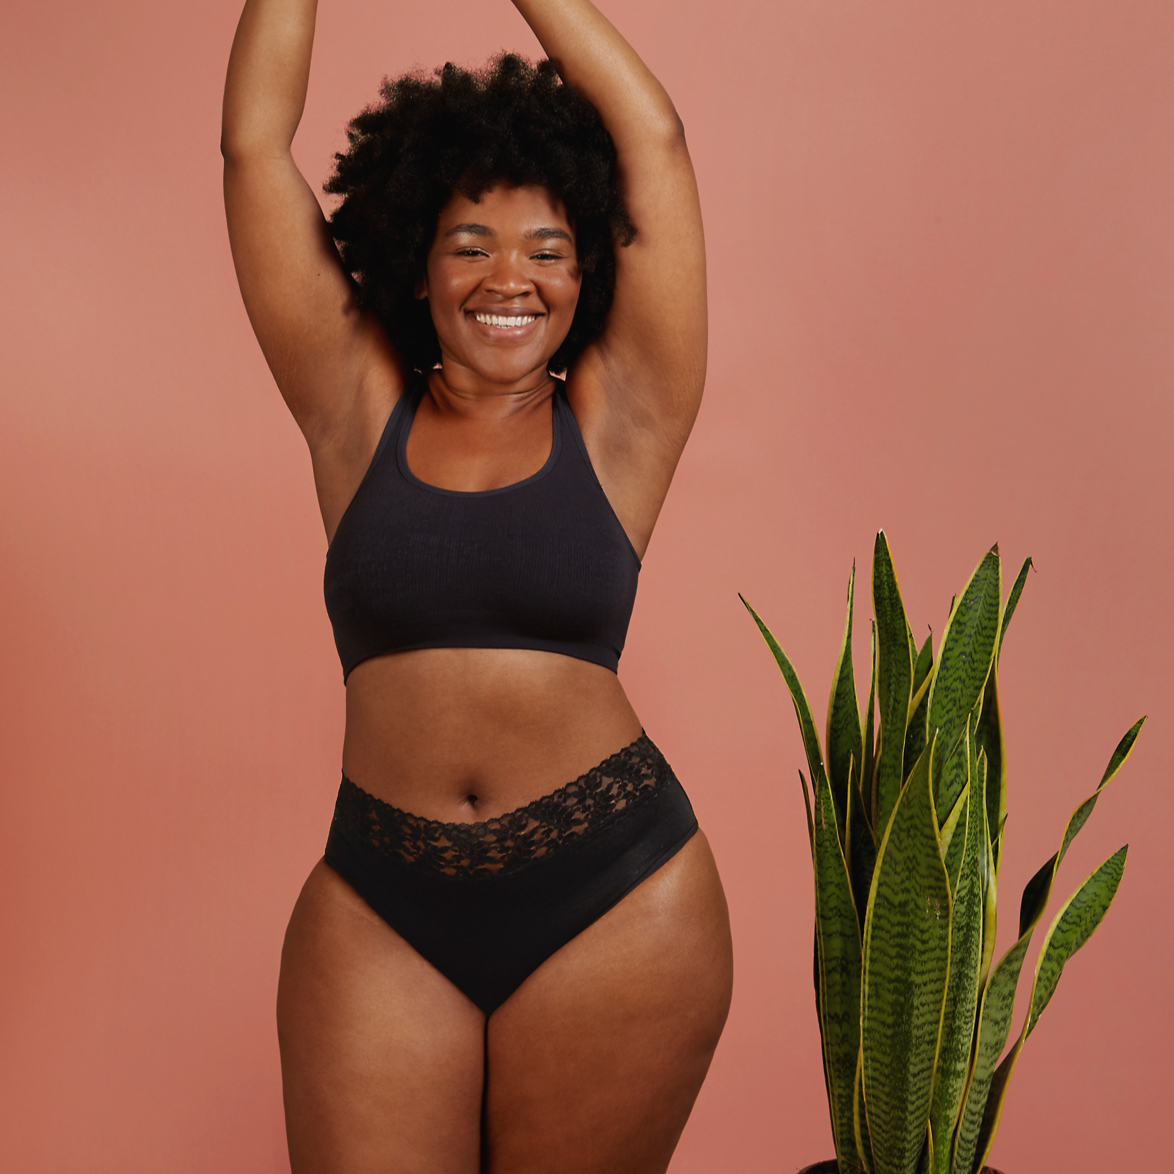 a woman wears a black period pant with lace and a black crop top with her hands in the air